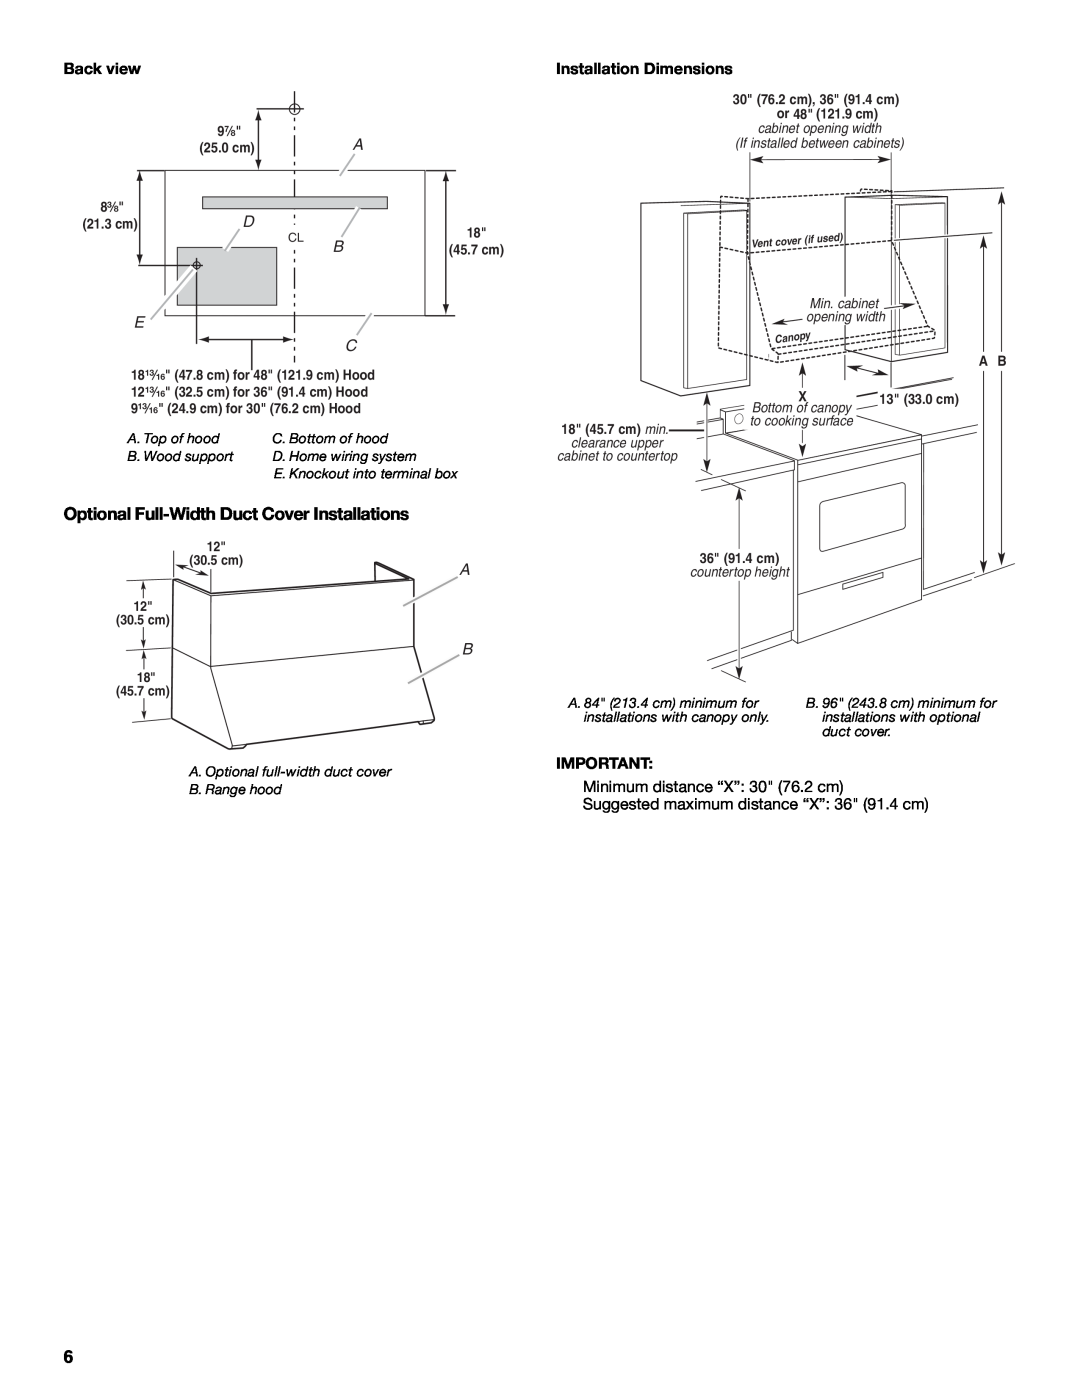 Jenn-Air W10274316B Optional Full-WidthDuct Cover Installations, Back view, Installation Dimensions, 9⁷⁄₈, 25.0 cm, 8³⁄₈ 